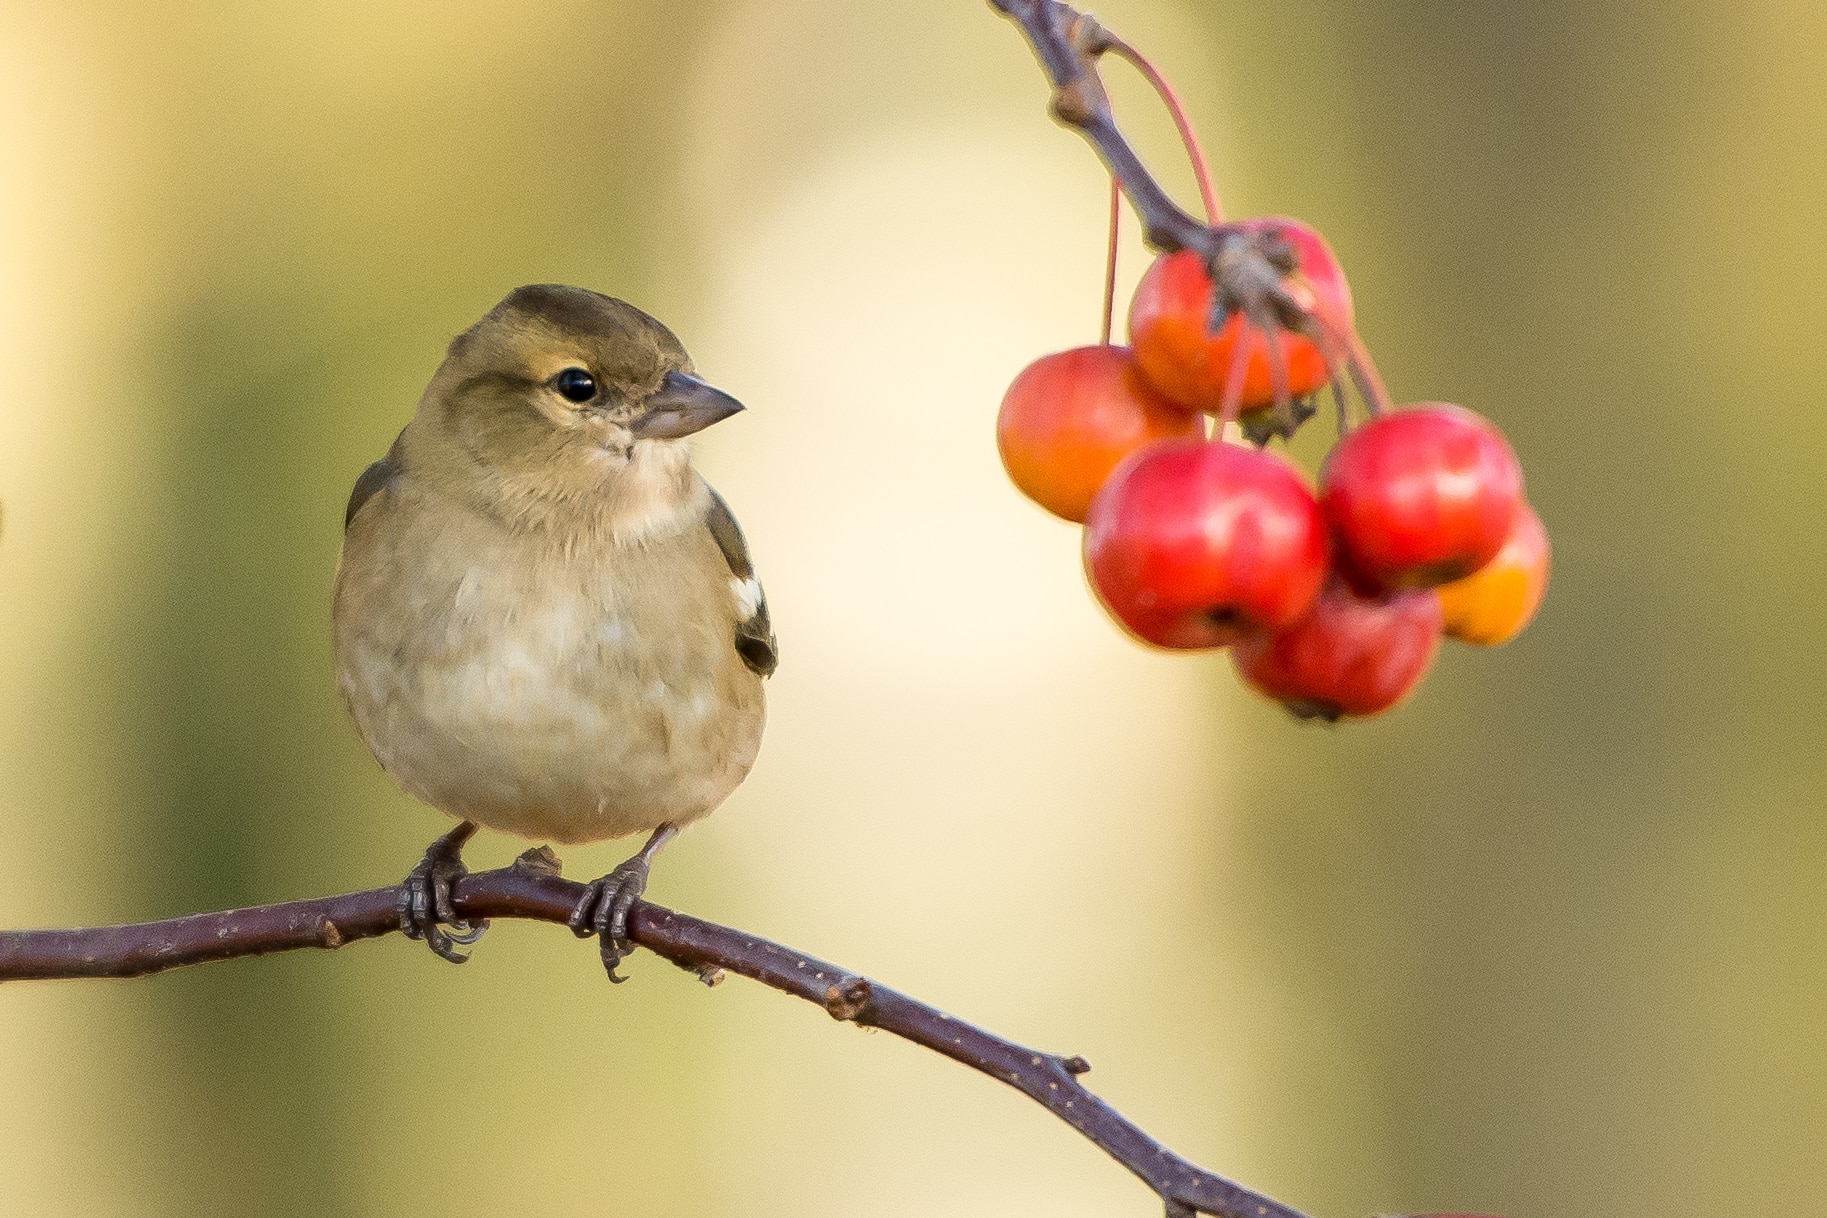 gray and brown bird on branch near red round fruits